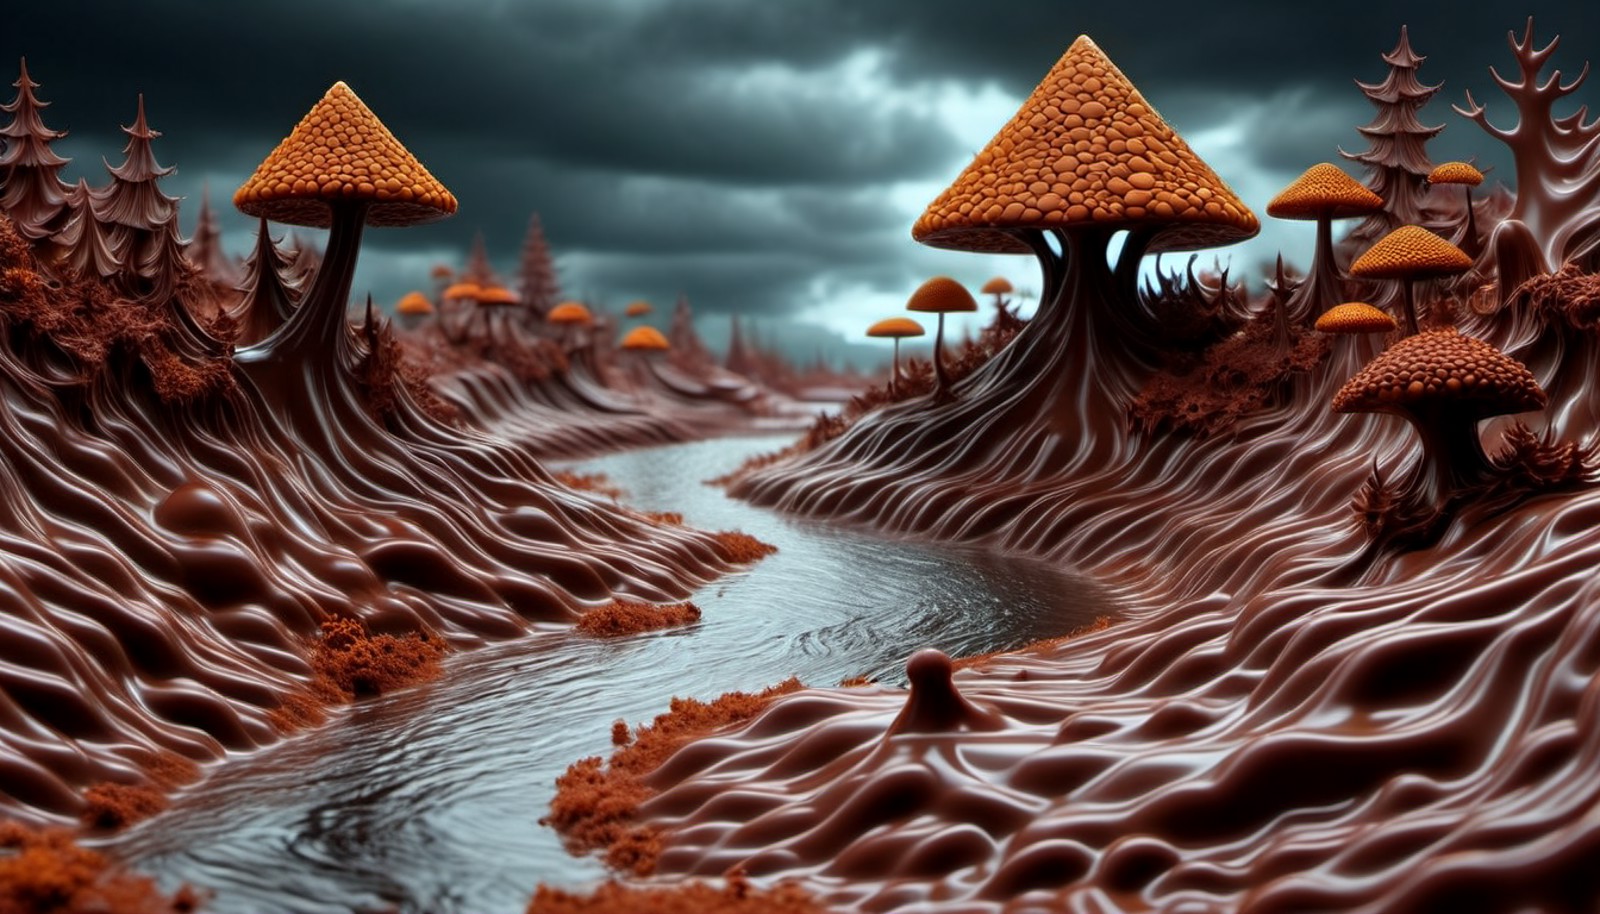 ChocolateRay, landscape of a Mystical The River Styx and Lichen, wearing warm made entirely of chocolate, Stormy weather, ...